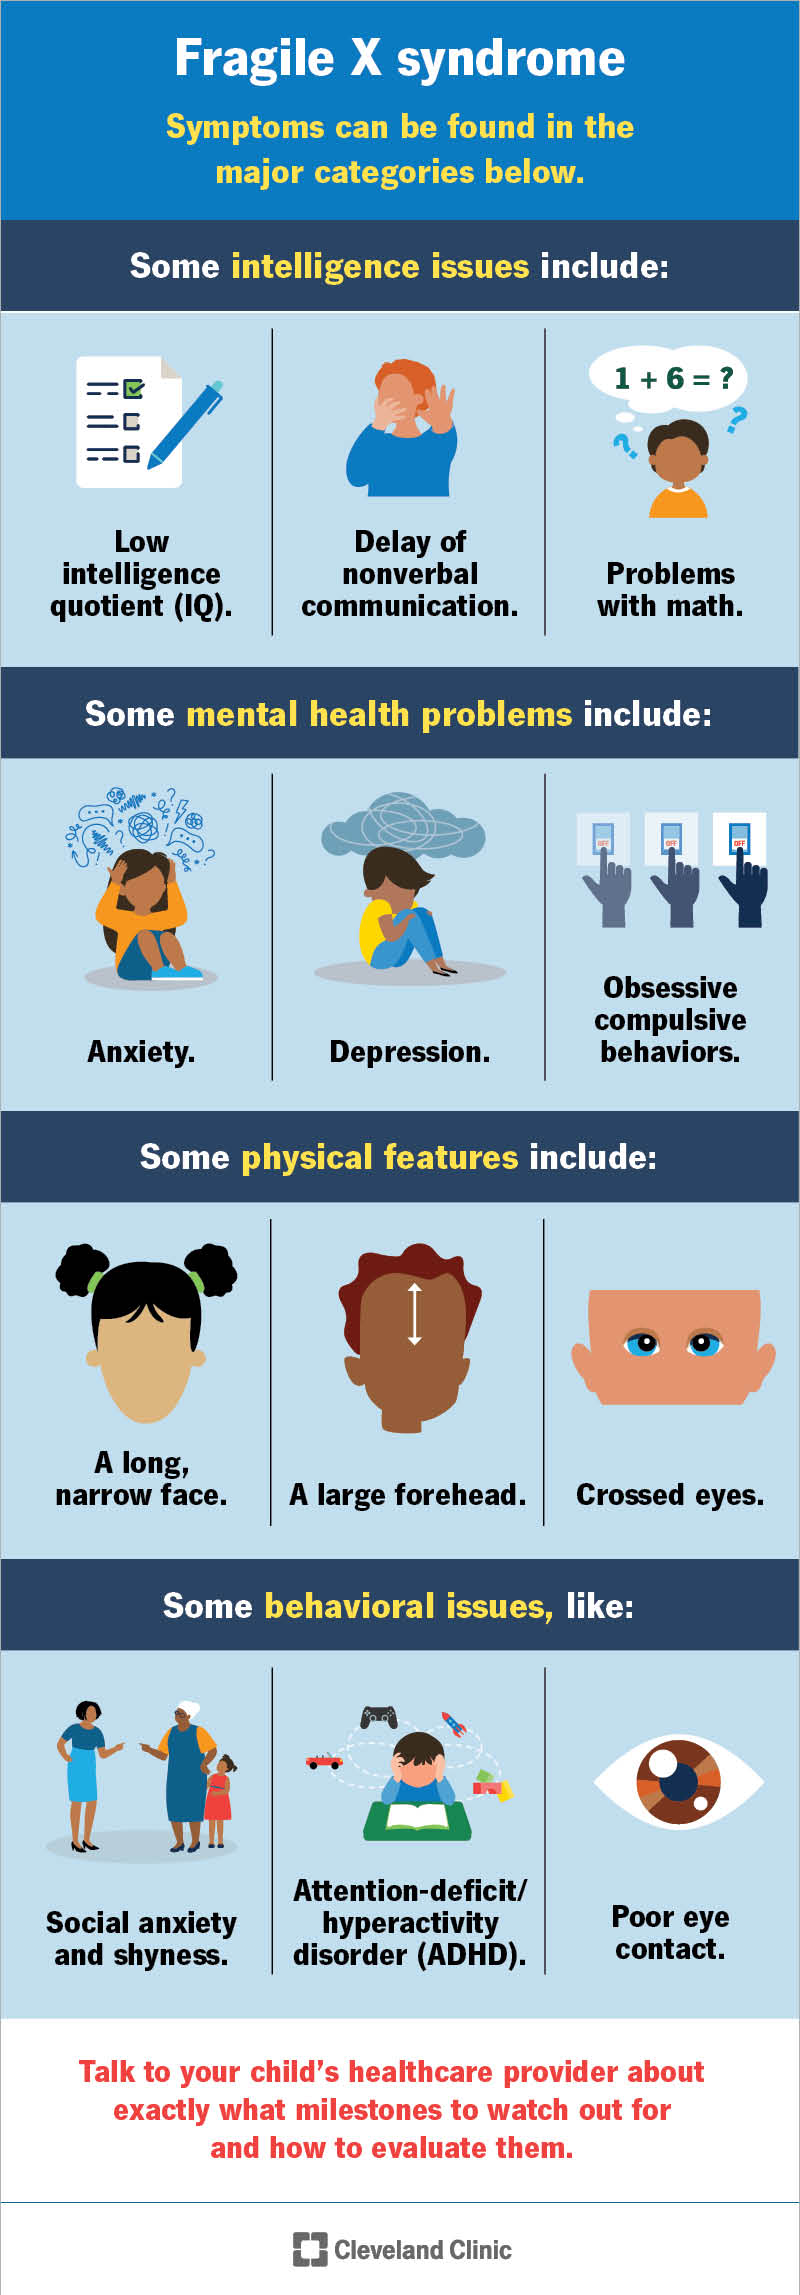 Fragile X syndrome symptoms, like intelligence, mental health, physical features and behavioral issues